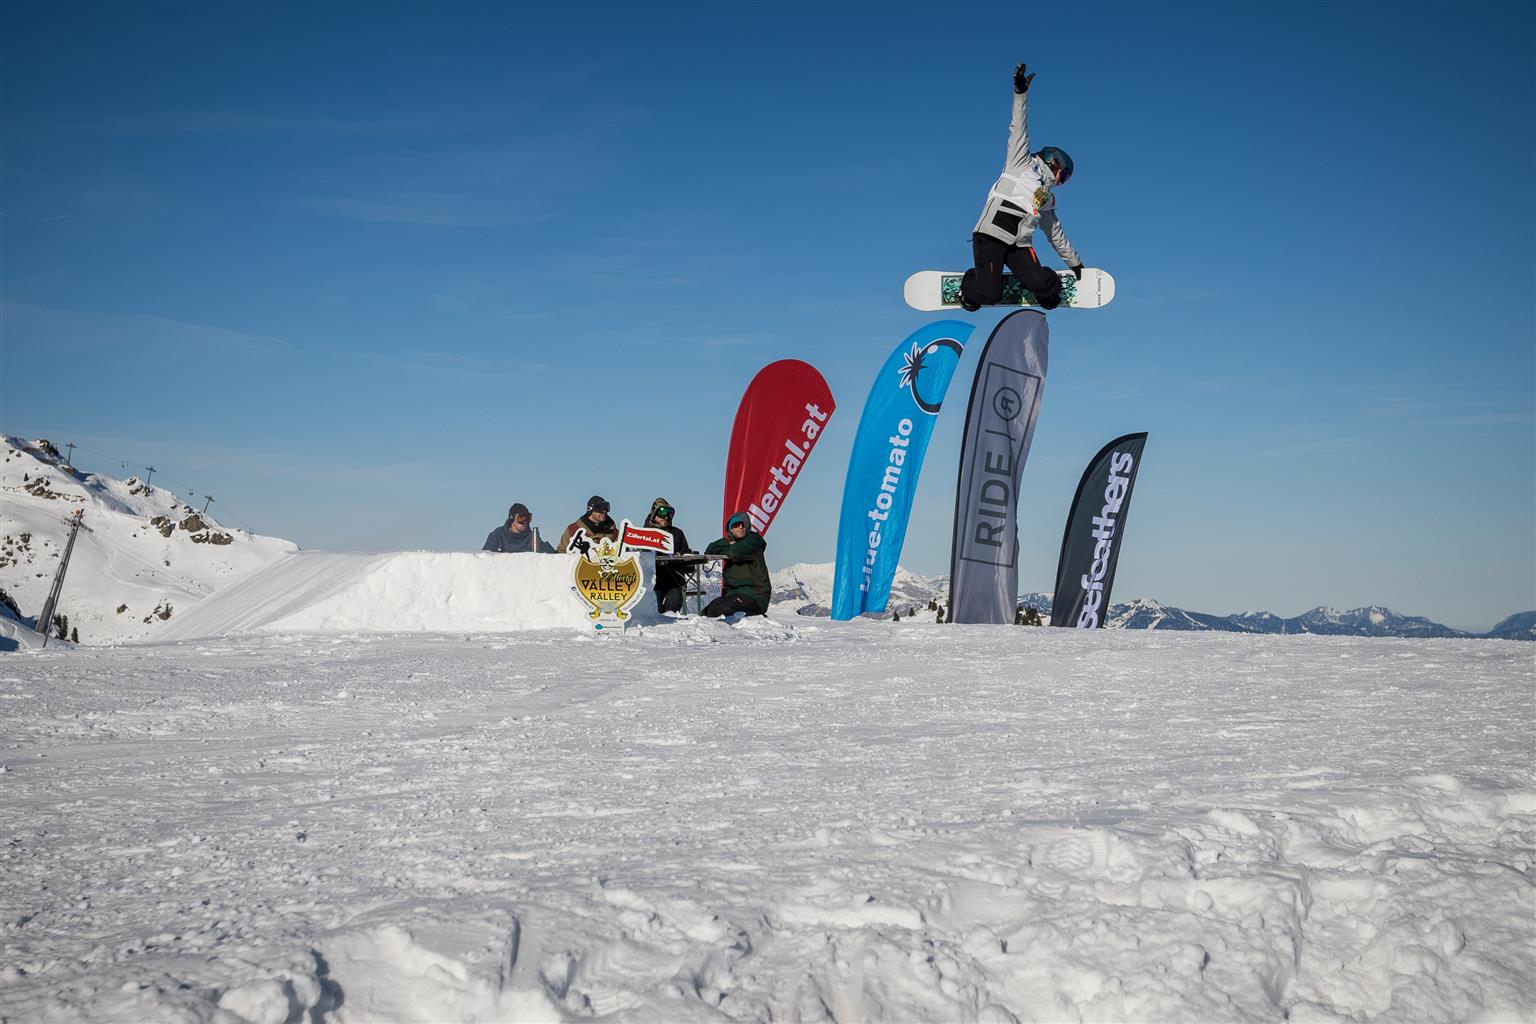 Boardriding Events Zillertal Valley Ralley hosted by Blue Tomato and Ride Snowboards - stop #1